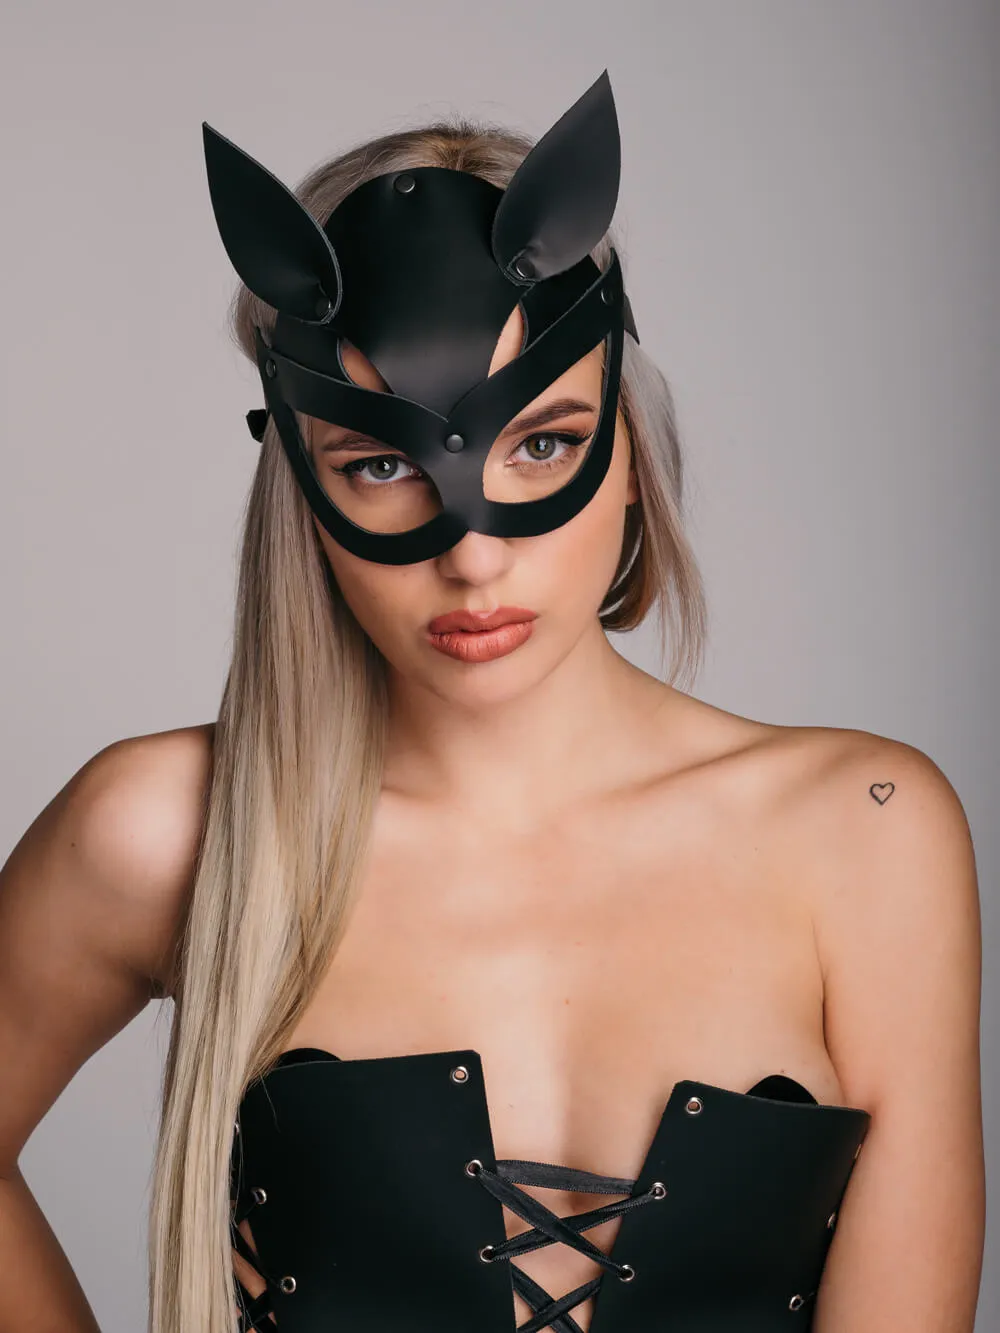 Handmade black erotic leather cat mask with eye holes and cat ears.